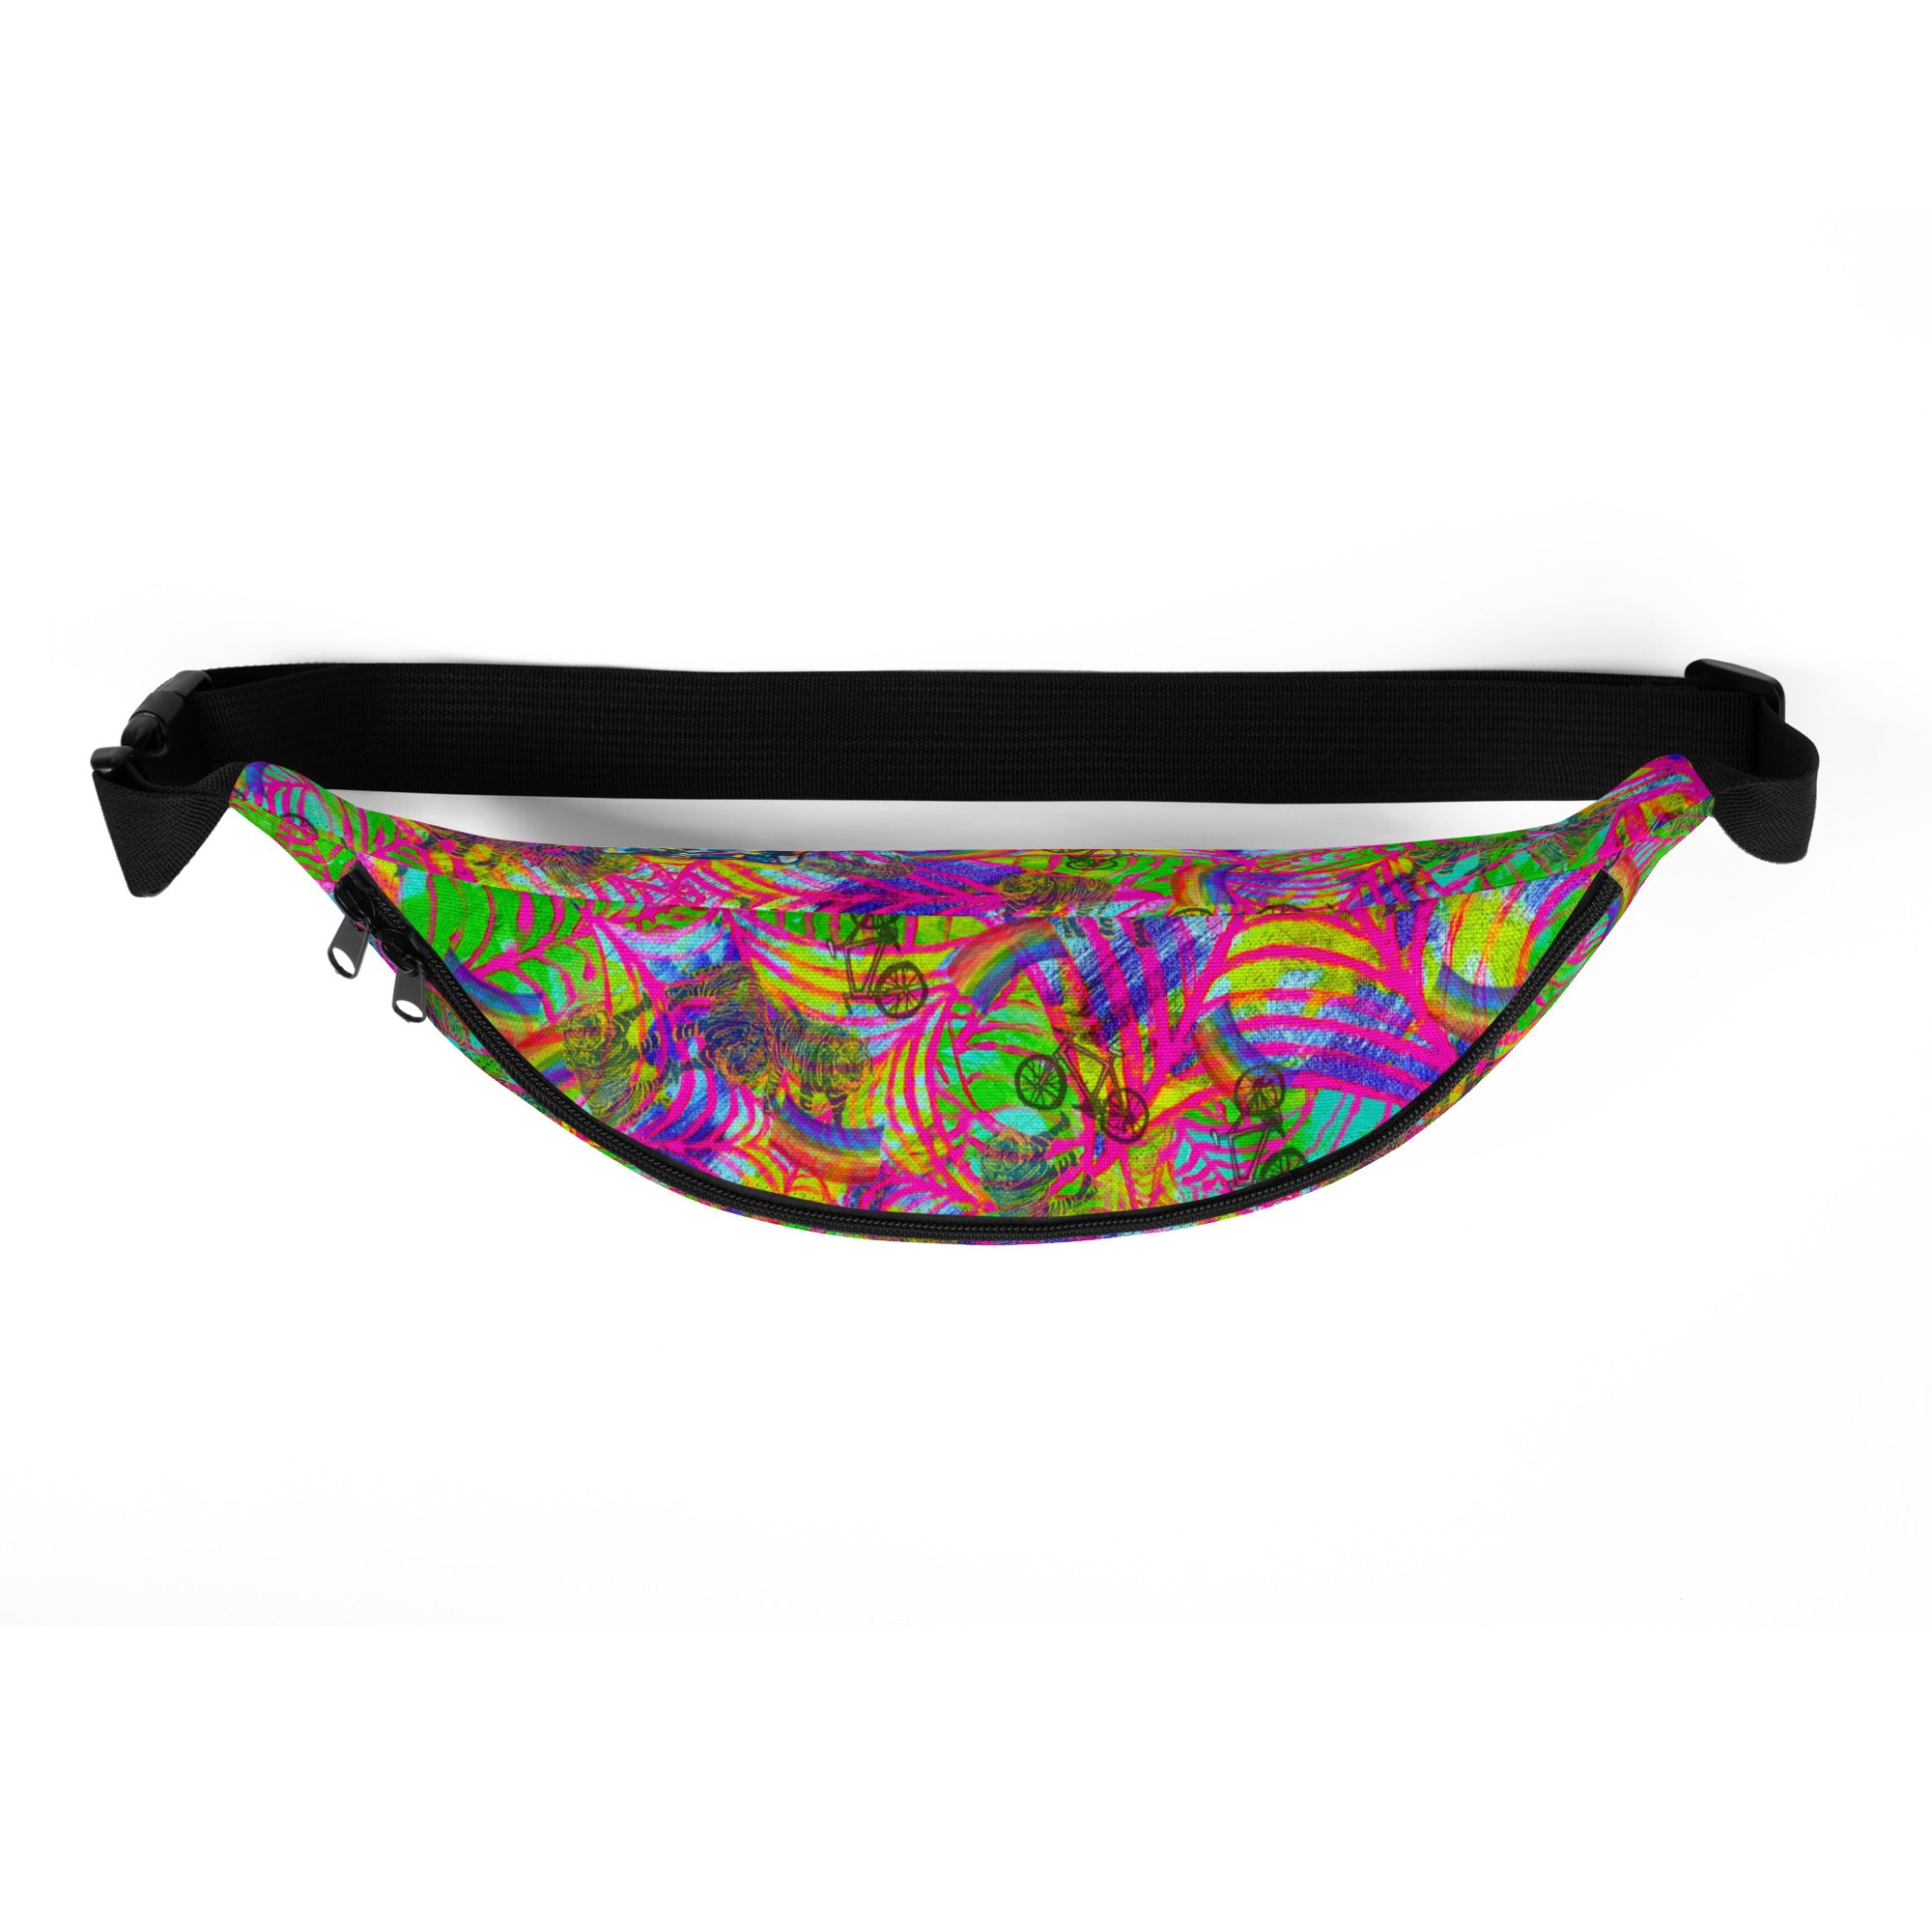 TEAM SUPER HAPPINESS RAINBOW BICYCLE TIGER Fanny Pack